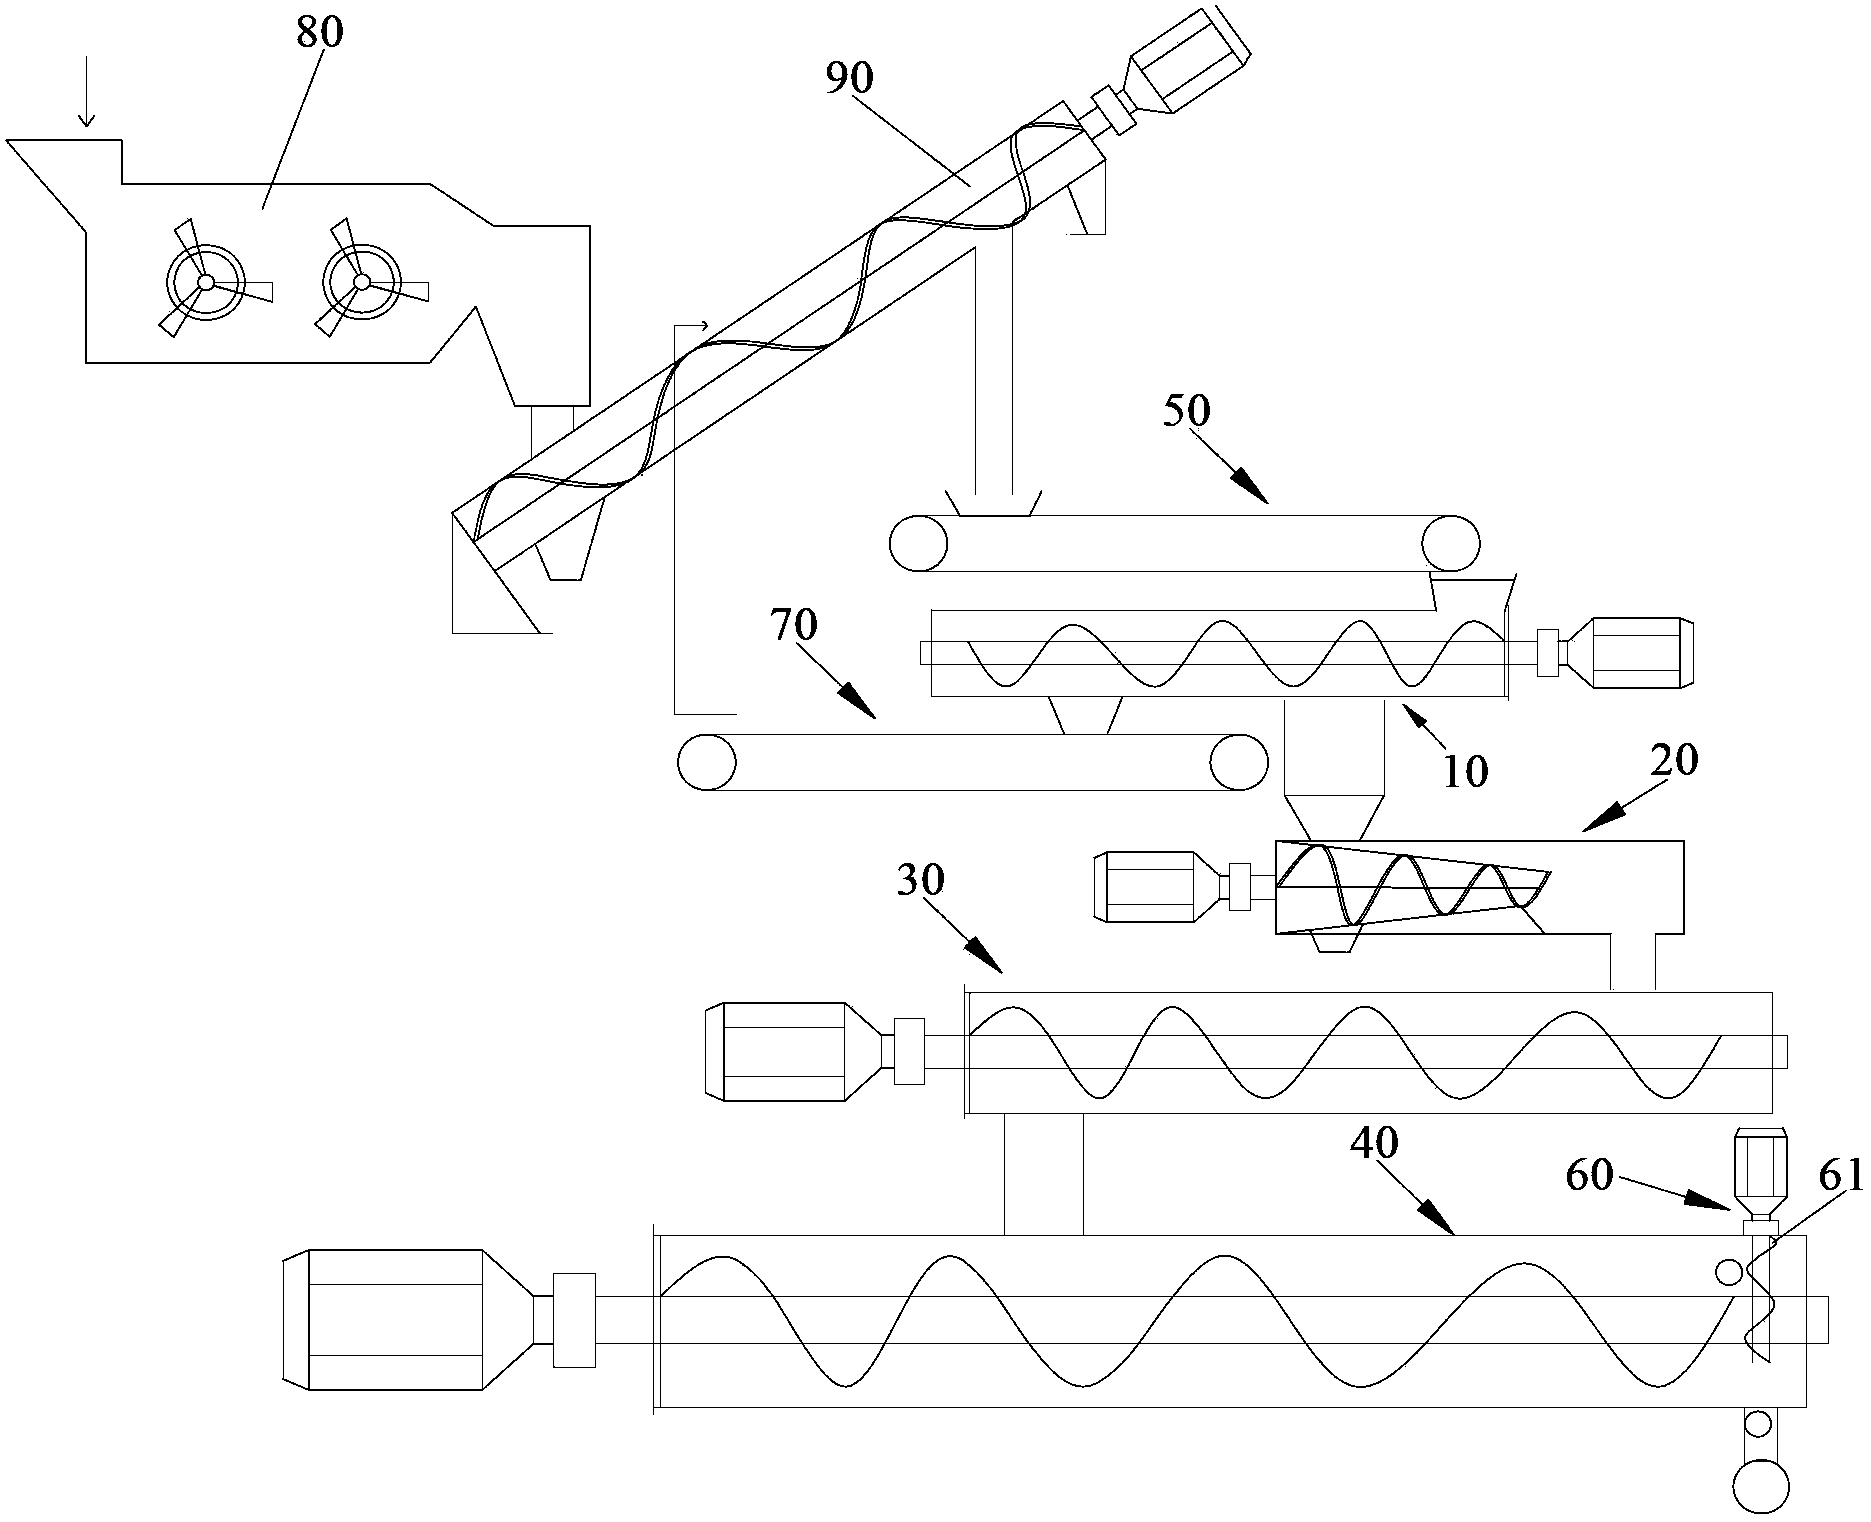 Pretreatment method of cellulosic ethanol raw materials